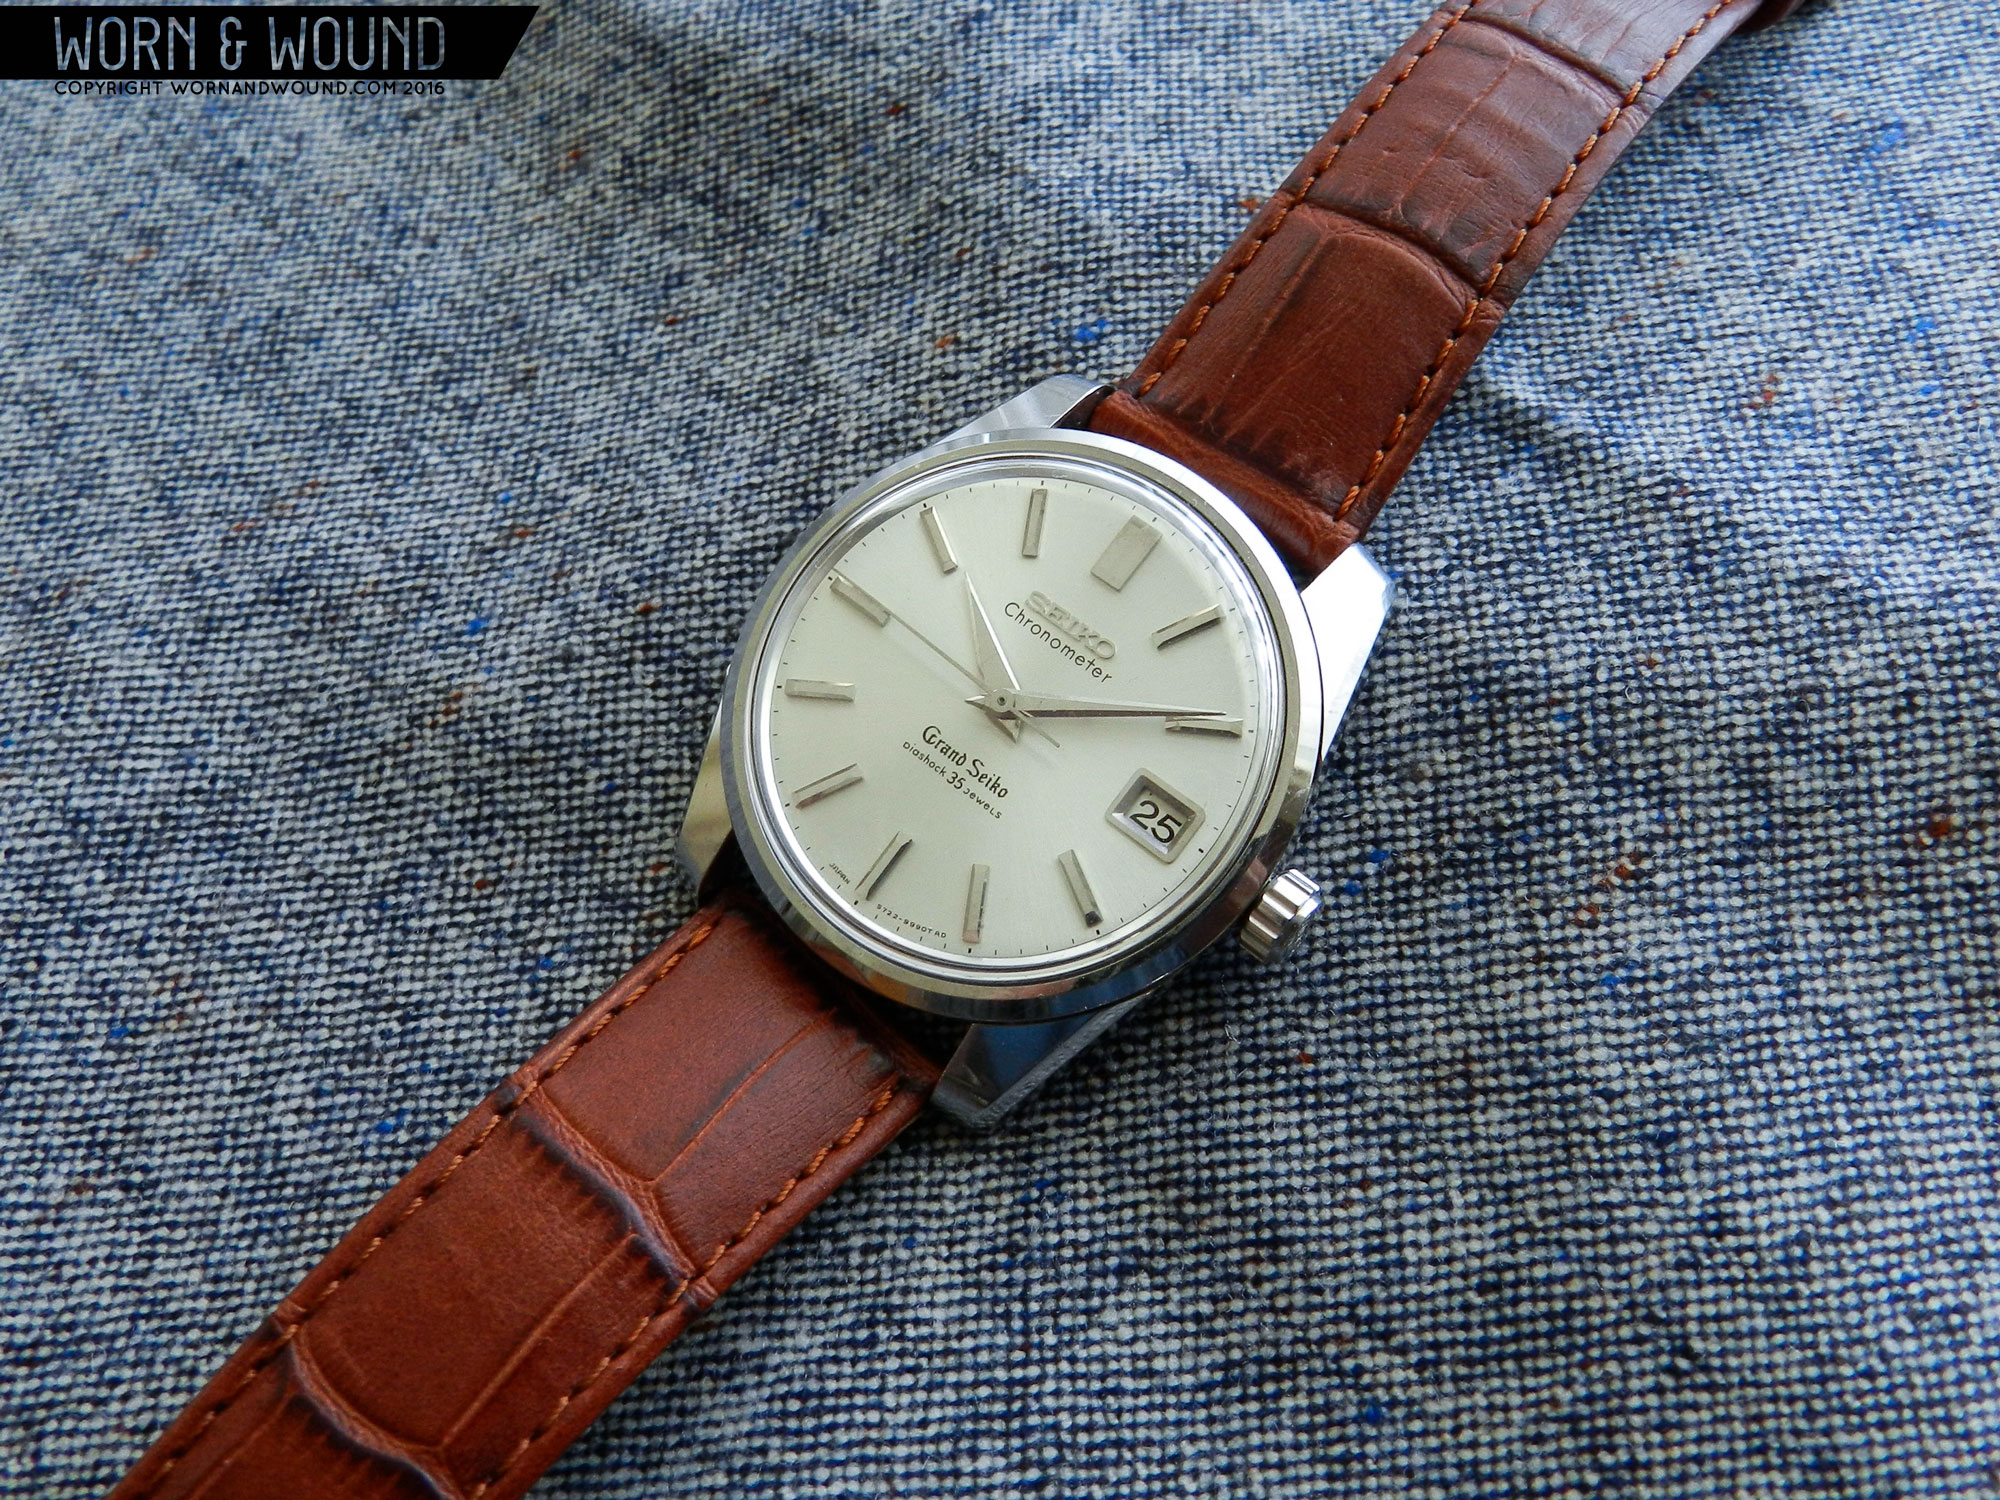 Watches, Stories, and Gear: Top Ten Vintage Seikos, the Curse of Autocorrect, and More